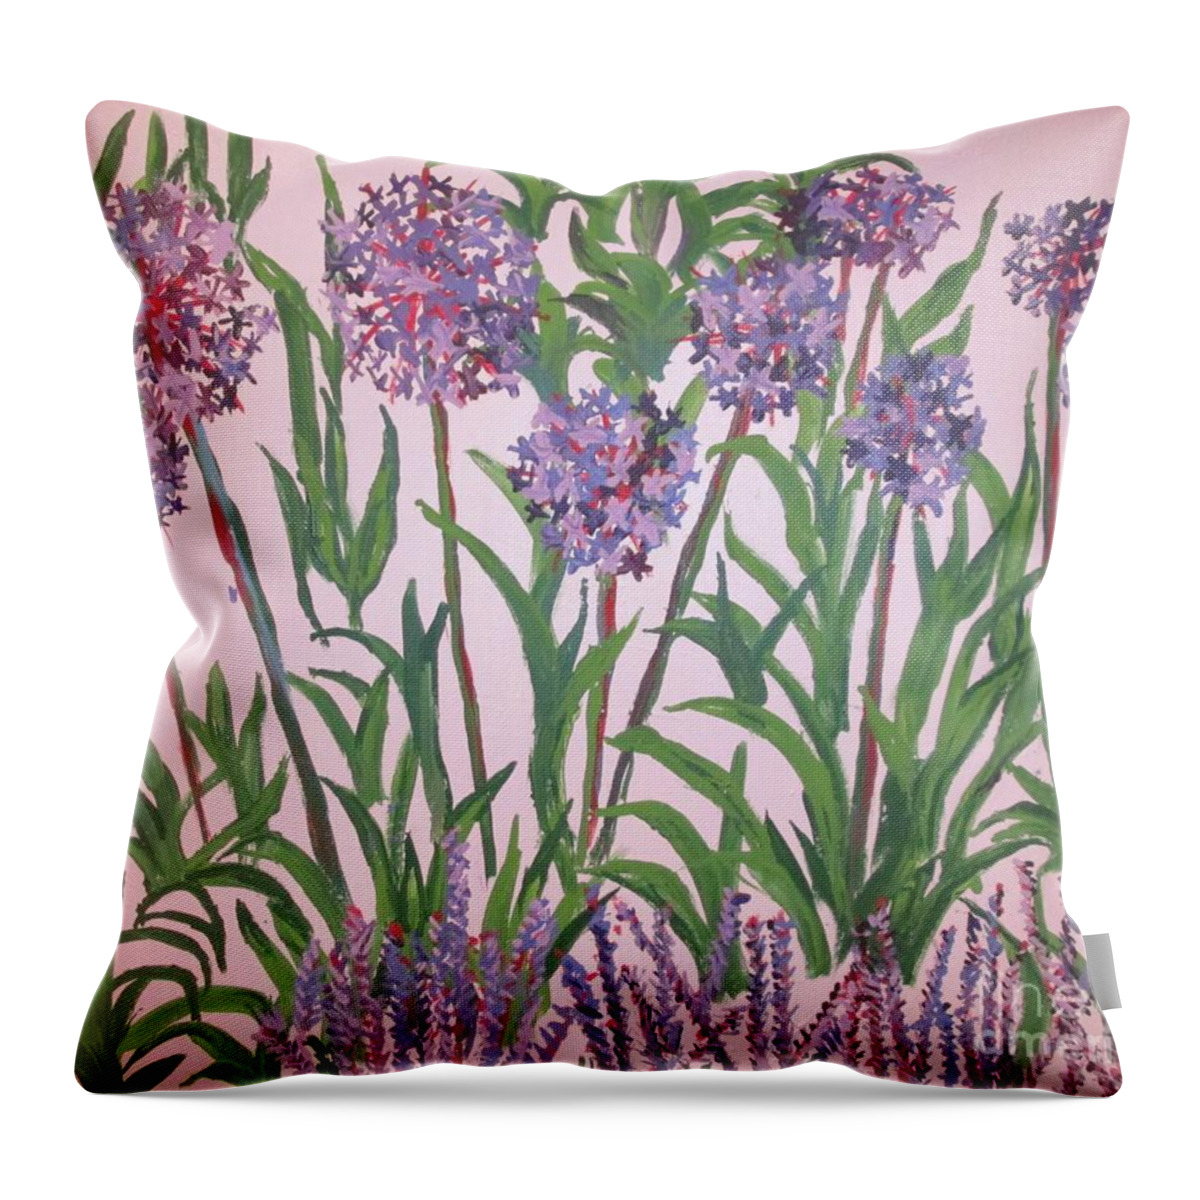 Flowers Throw Pillow featuring the painting Tapestry 3 by Jennylynd James